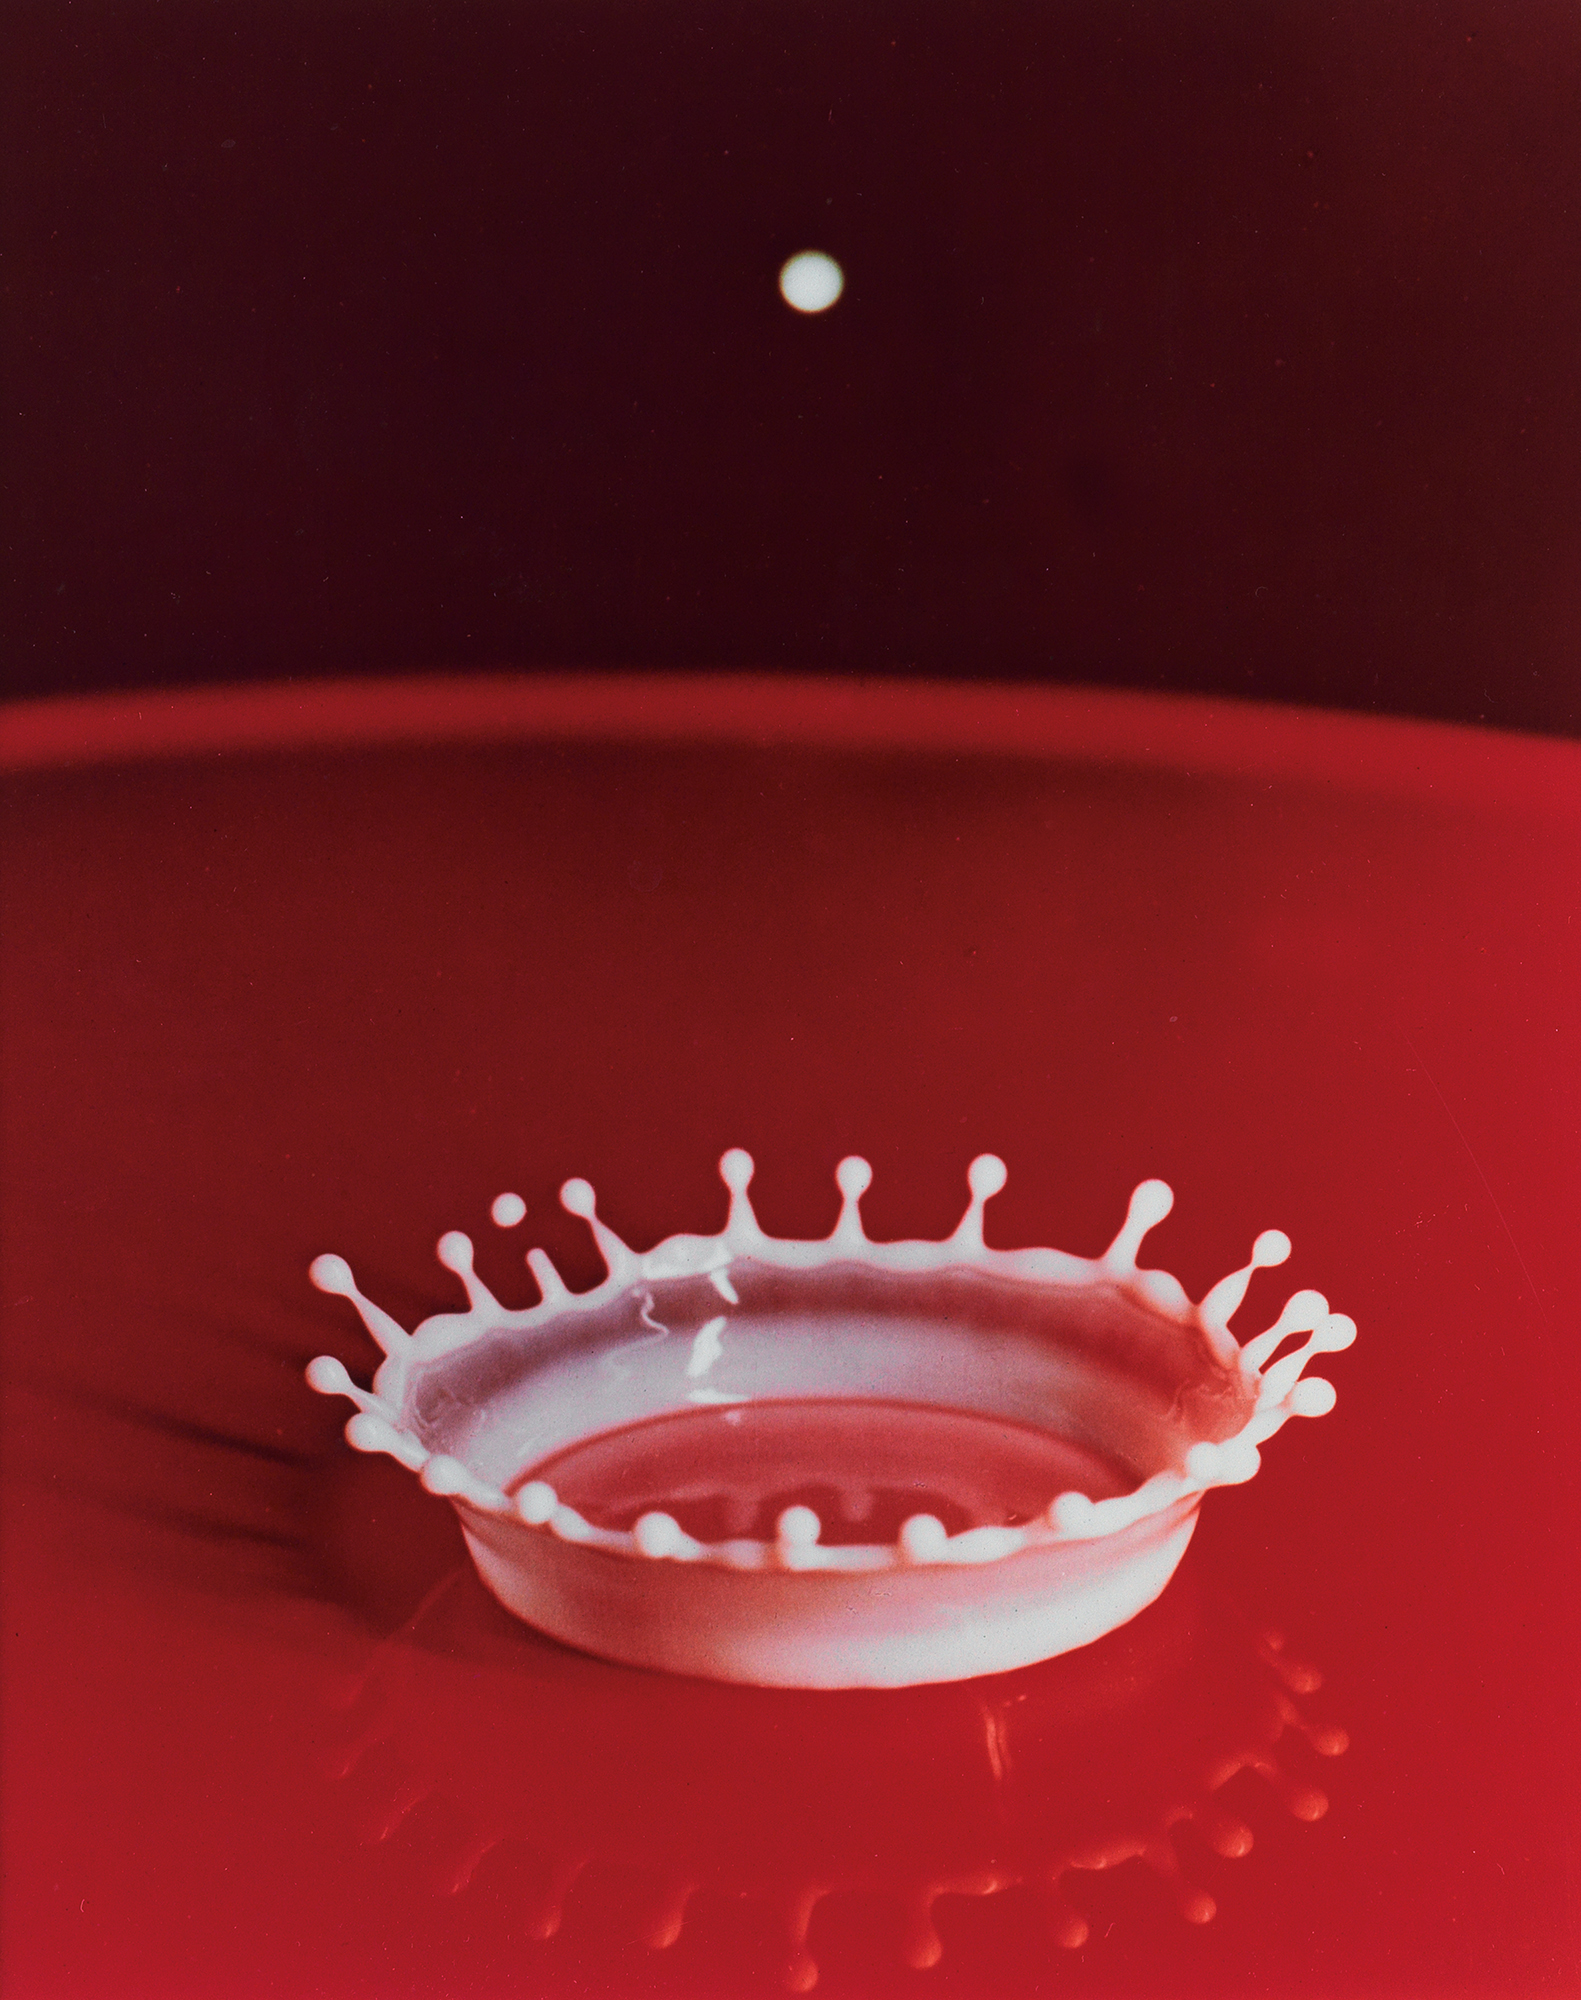 Milk Drop Coronet, a photograph taken by Harold Edgerton in 1957 and printed via the dye transfer technique in the 1970s, when Edgerton signed it in pencil.